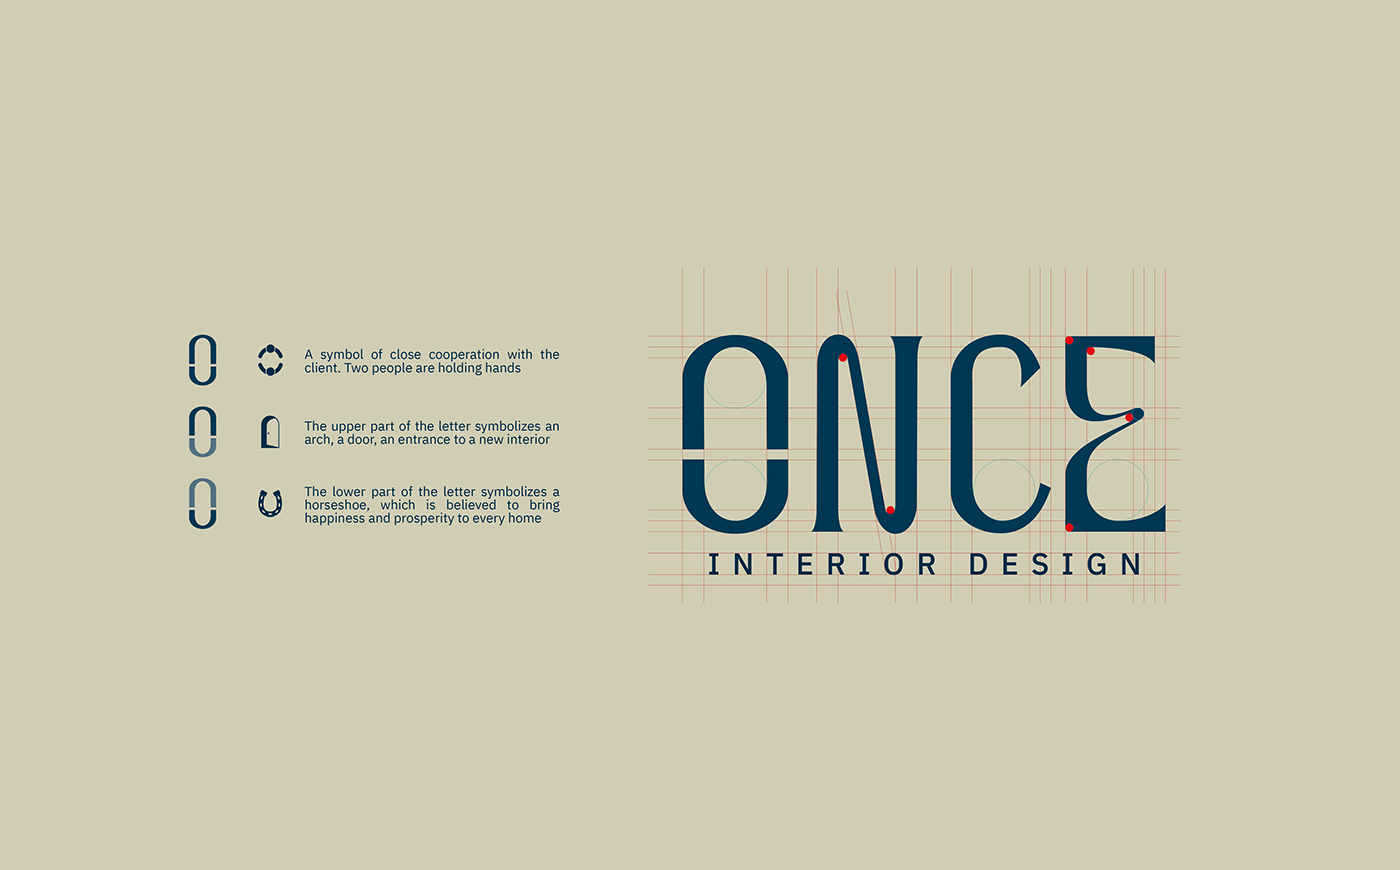 Concept and meaning of logotype for interior design studio ONCE